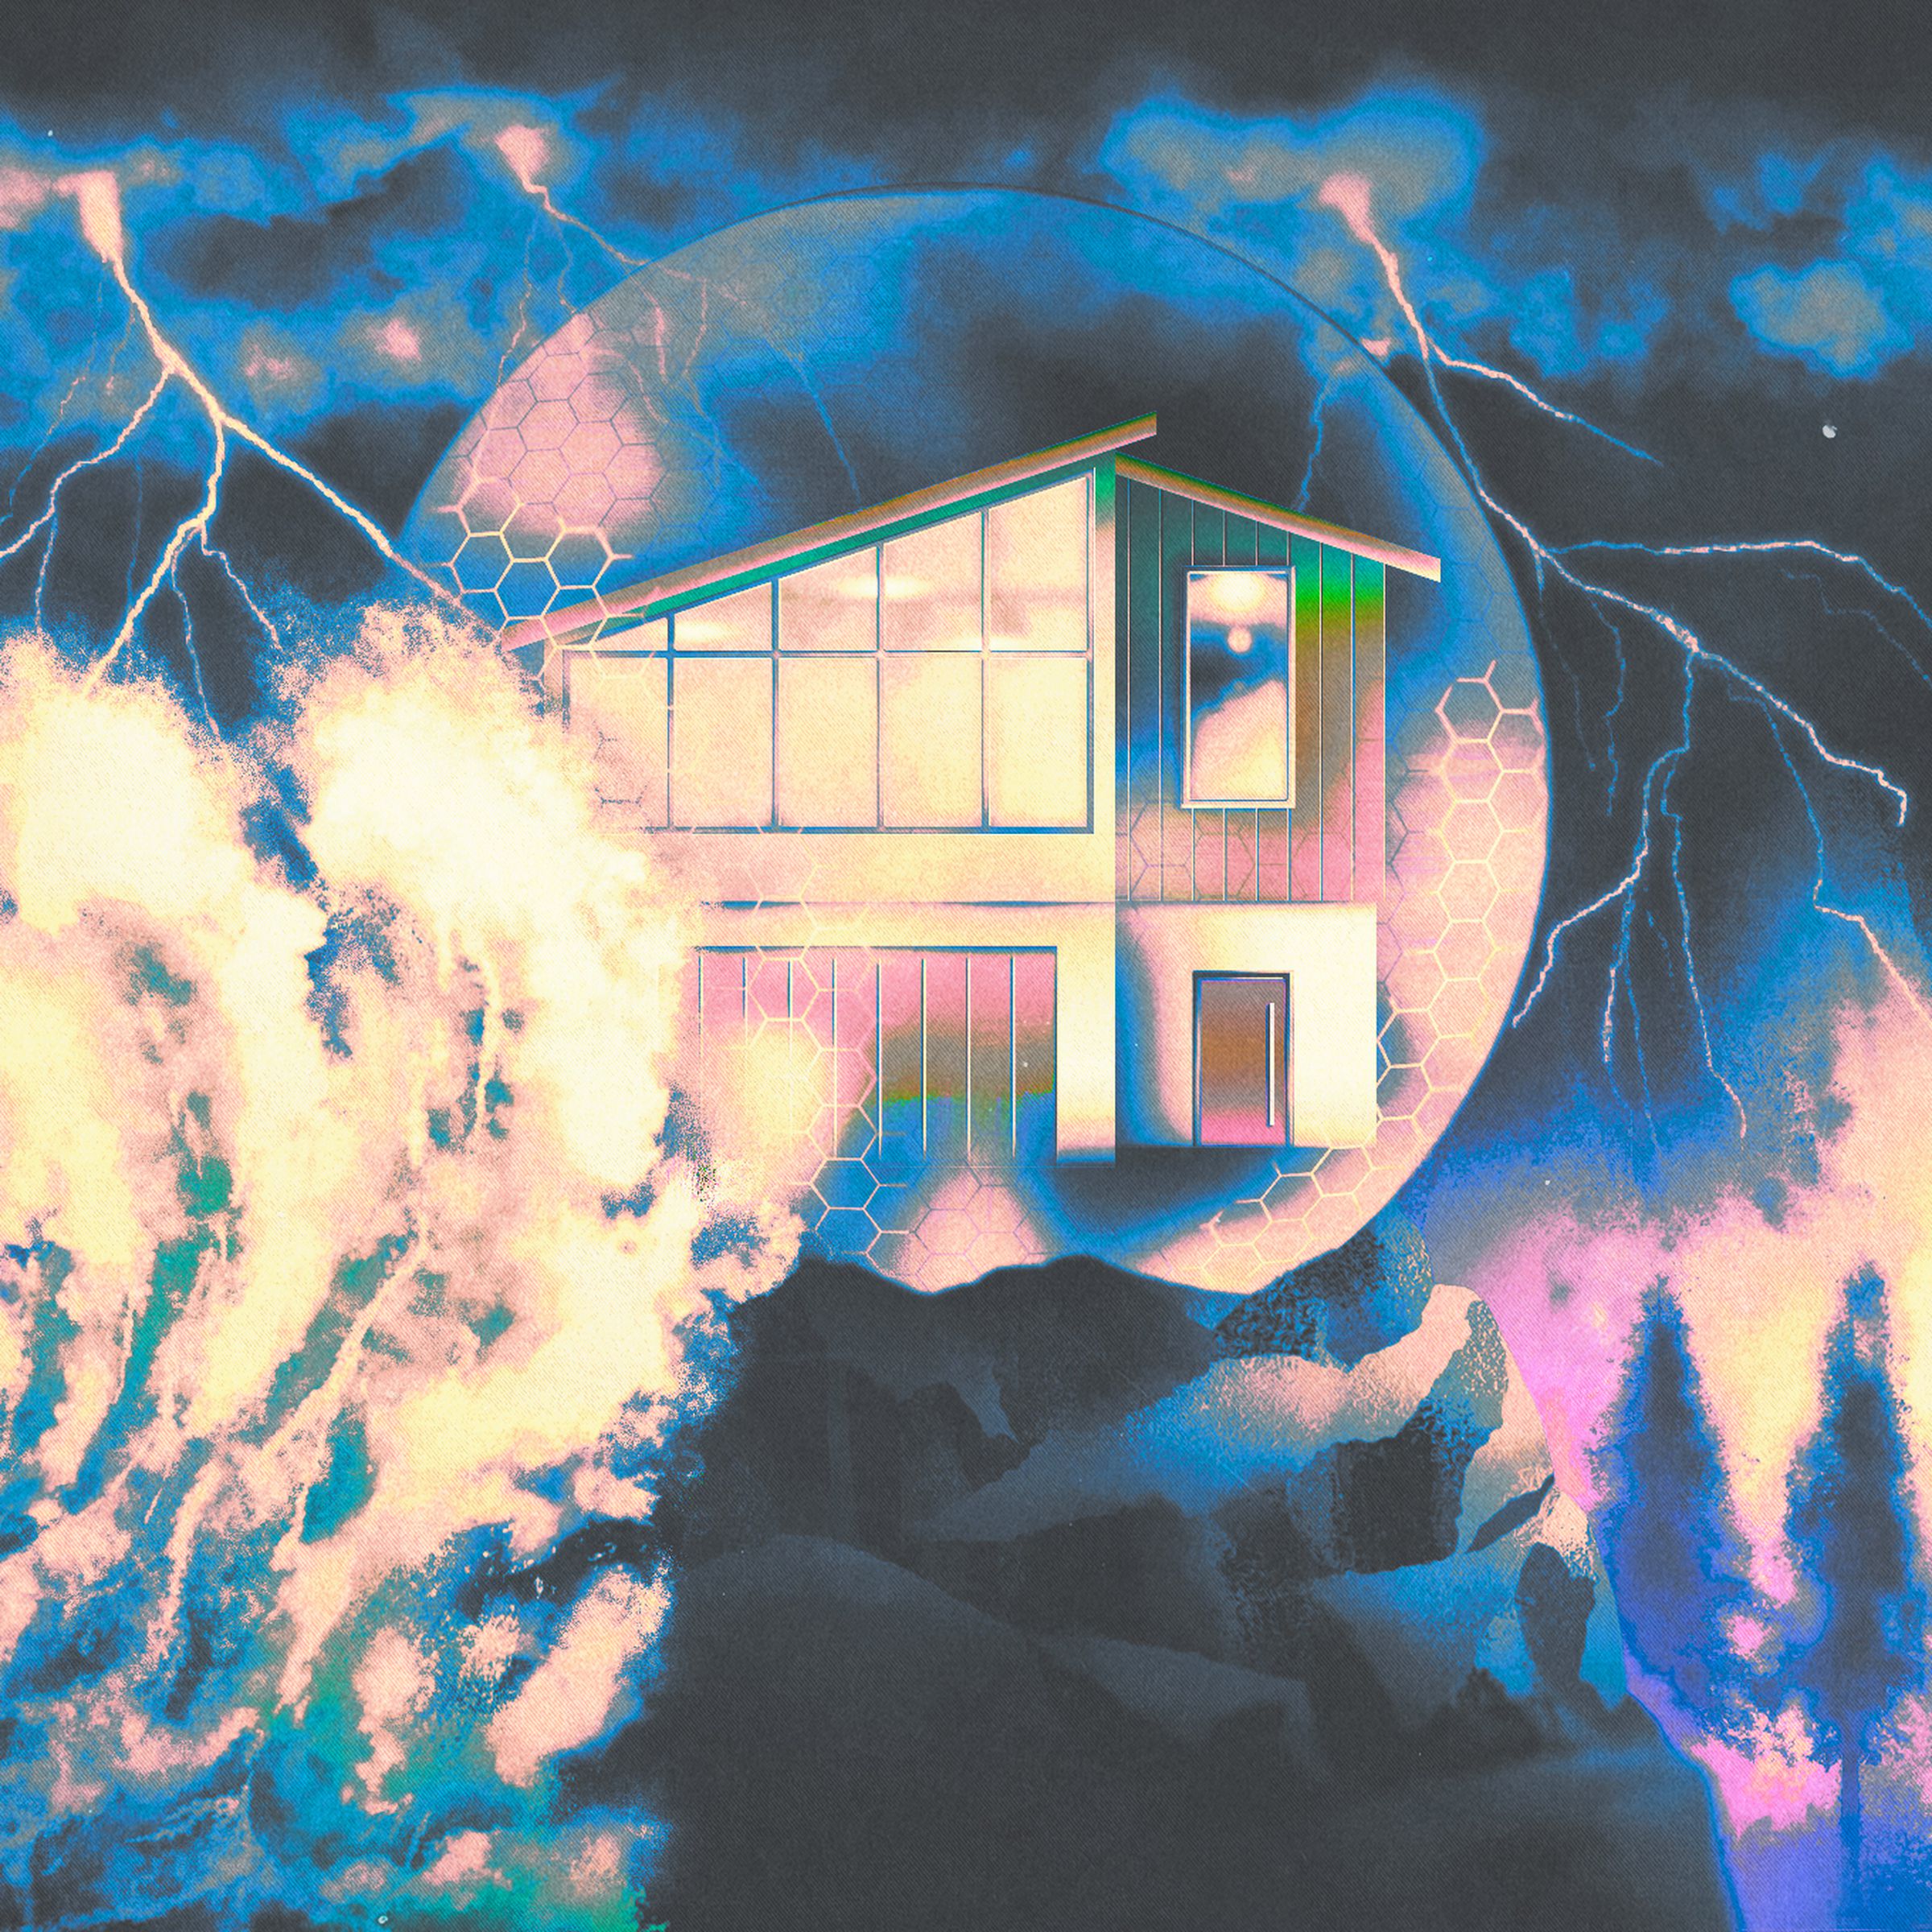 Conceptual illustration of a modern-looking house on a cliff surrounded by a forest fire, crashing ocean waves, and a lightning storm. The house is protected by a shield that surrounds it.